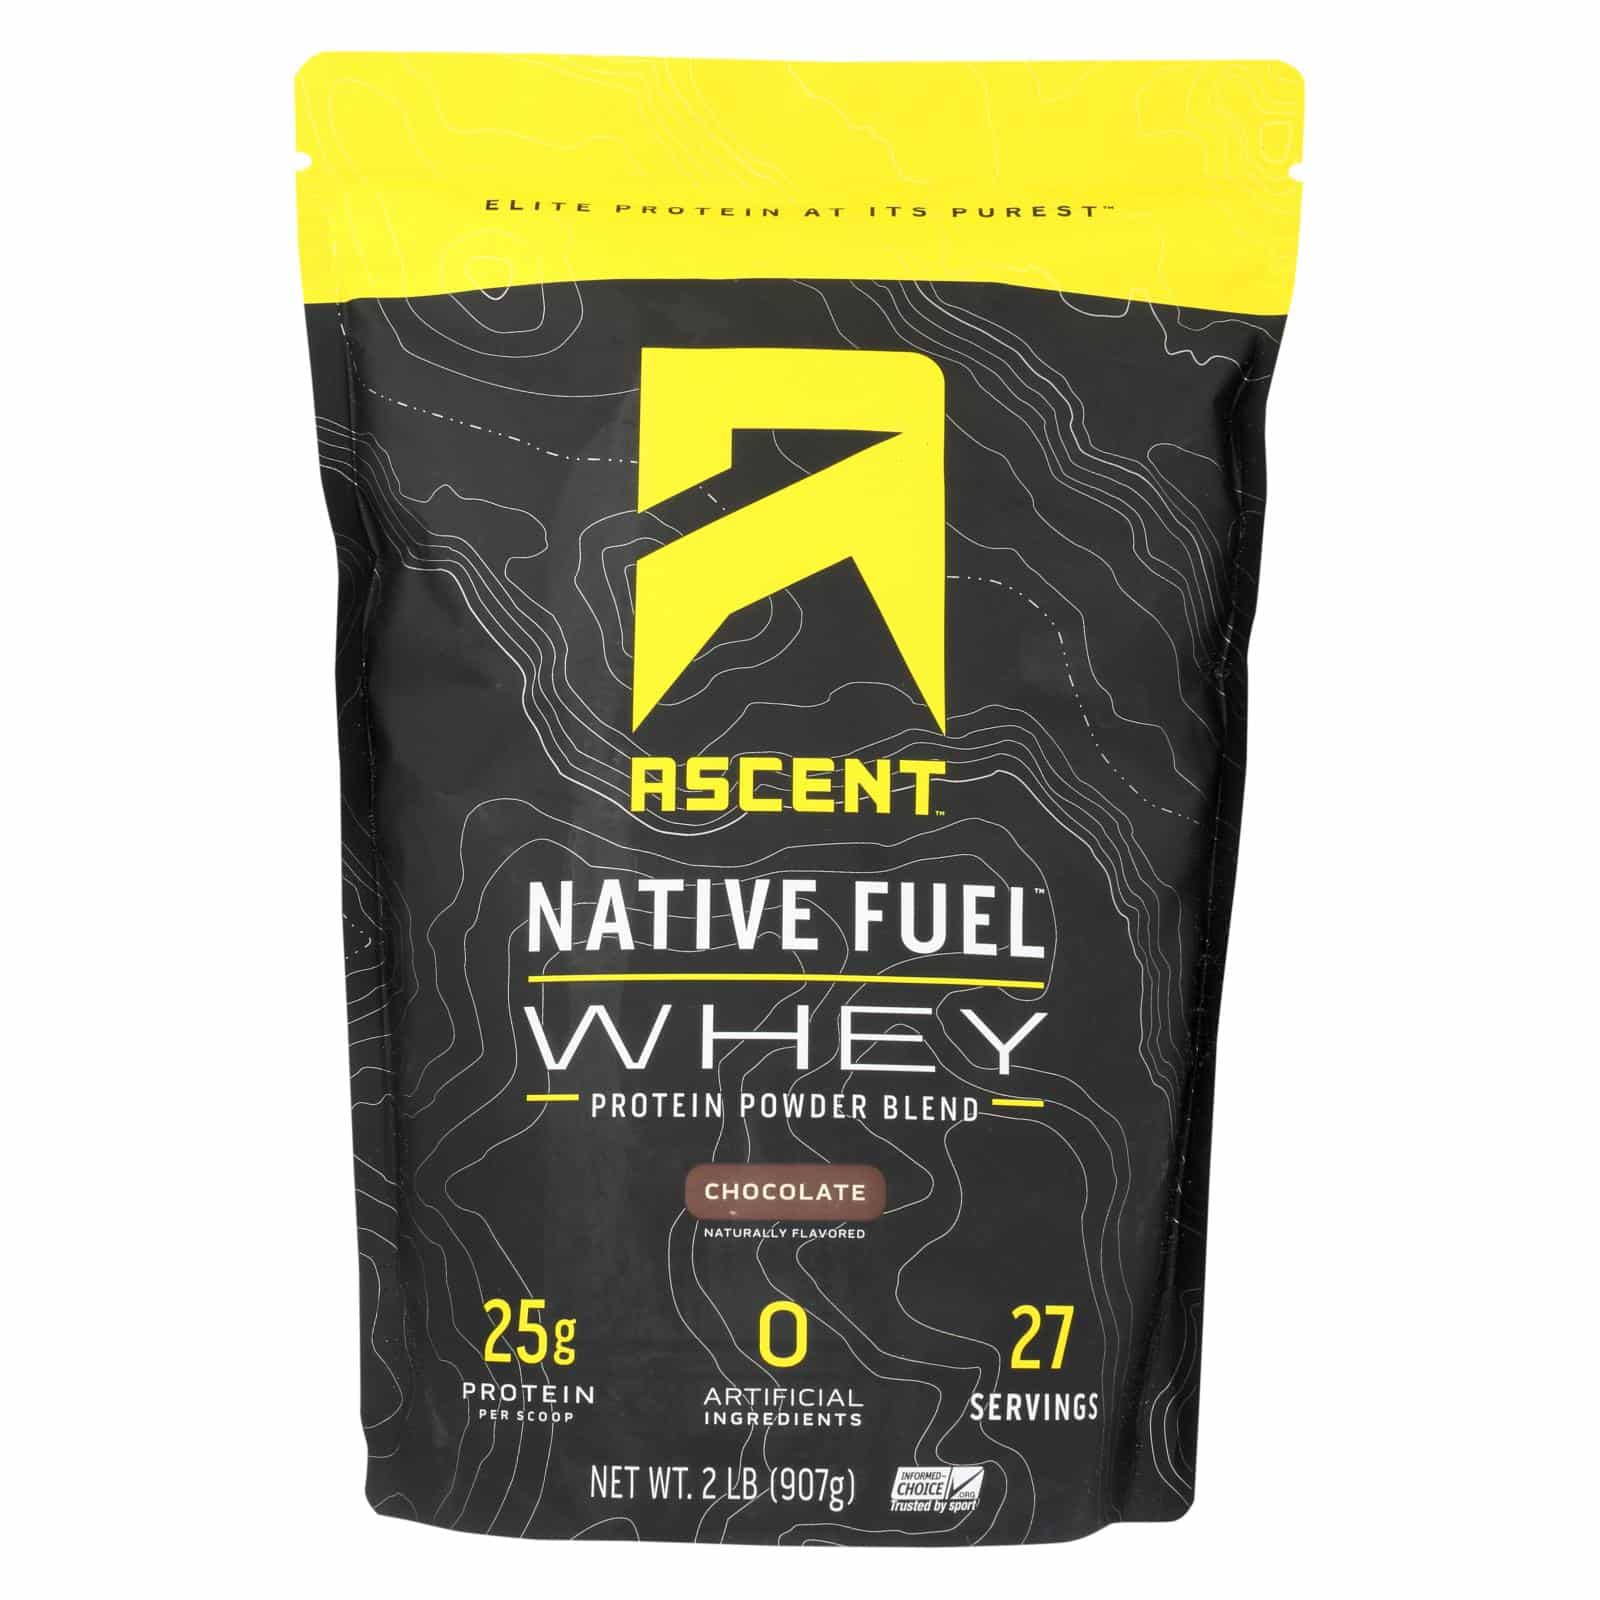 Ascent Native Fuel Chocolate Whey Protein Powder Blend Chocolate